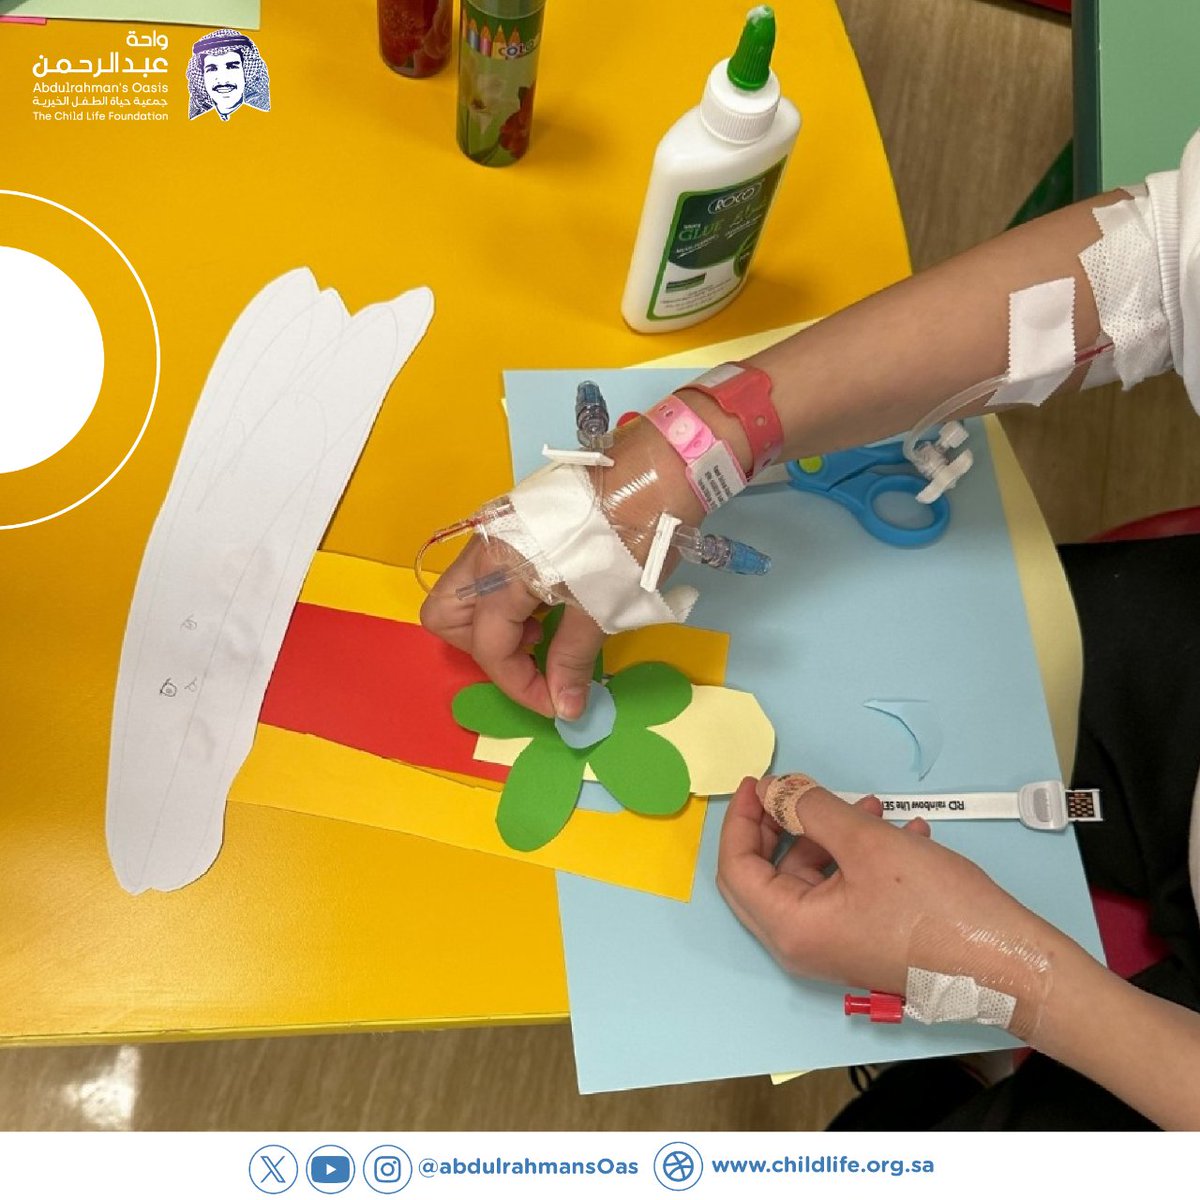 Every piece of art tells a story of resilience, healing, and hope. This paper rose, crafted by small hands, symbolizes the strength and spirit of our young creators. 

#جمعية_حياة_الطفل 
#واحة_عبدالرحمن
#child
#childlife
#childlifespecialist